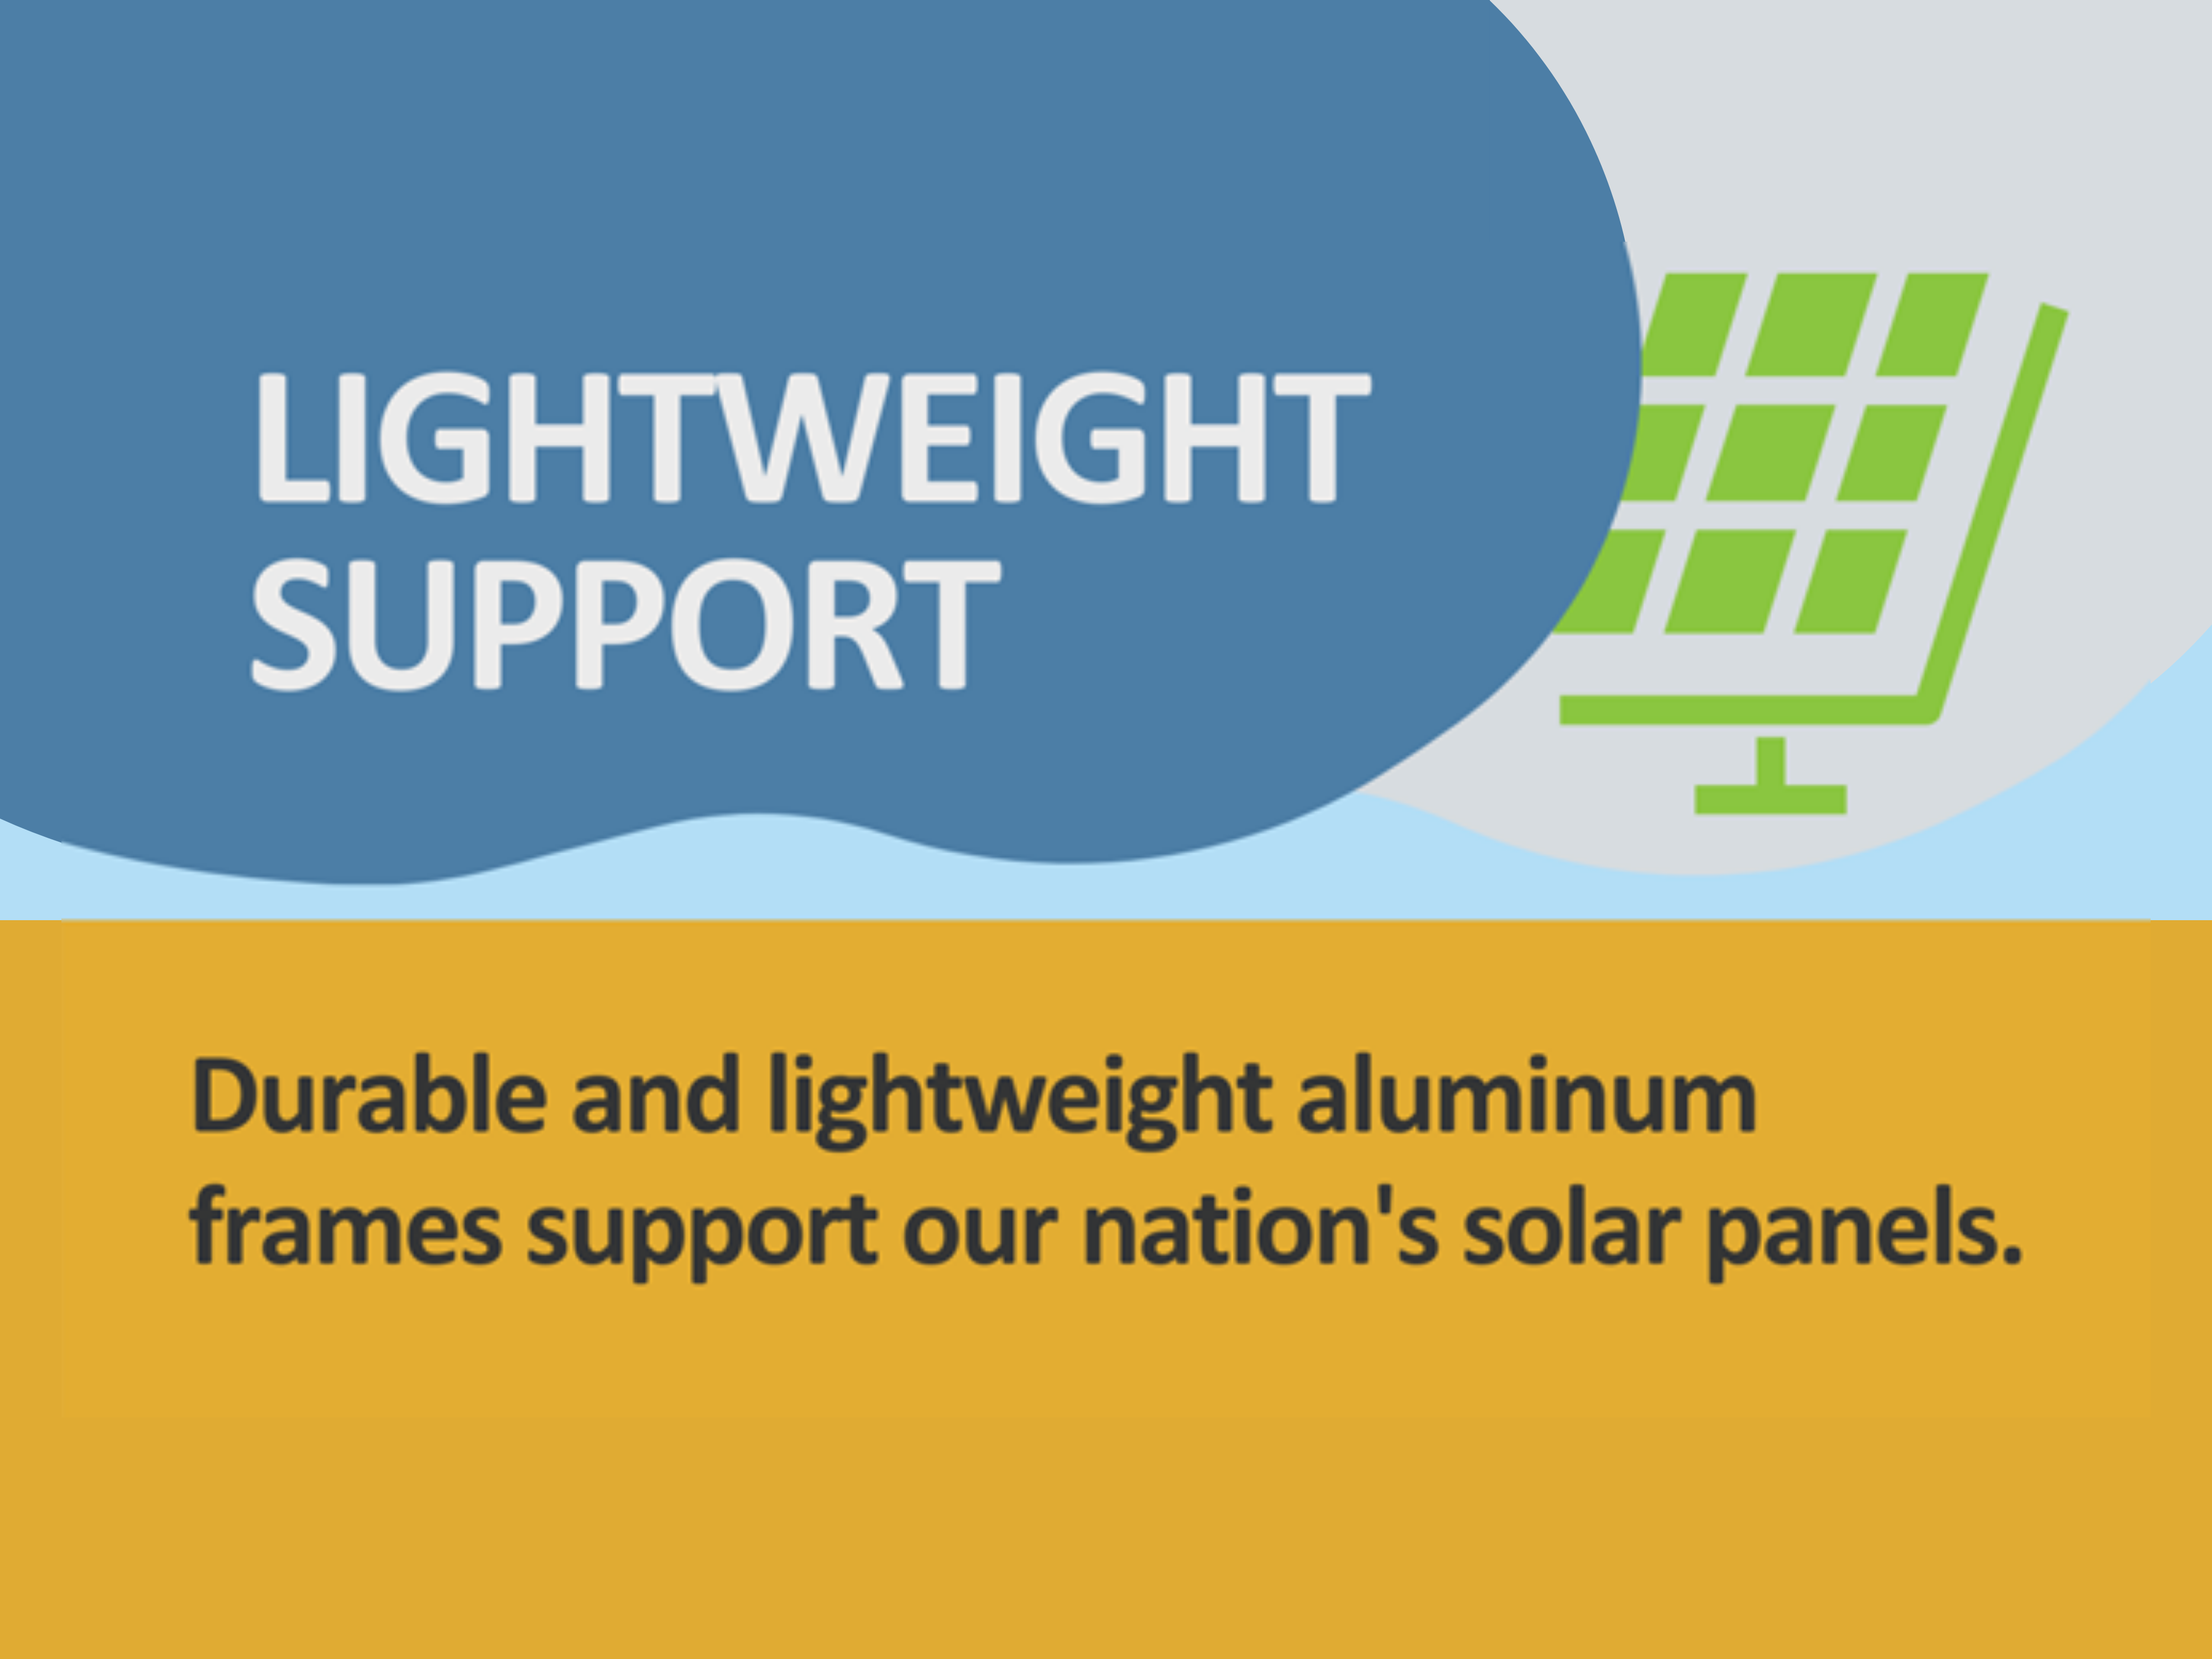 graphic about how aluminum supports solar panels